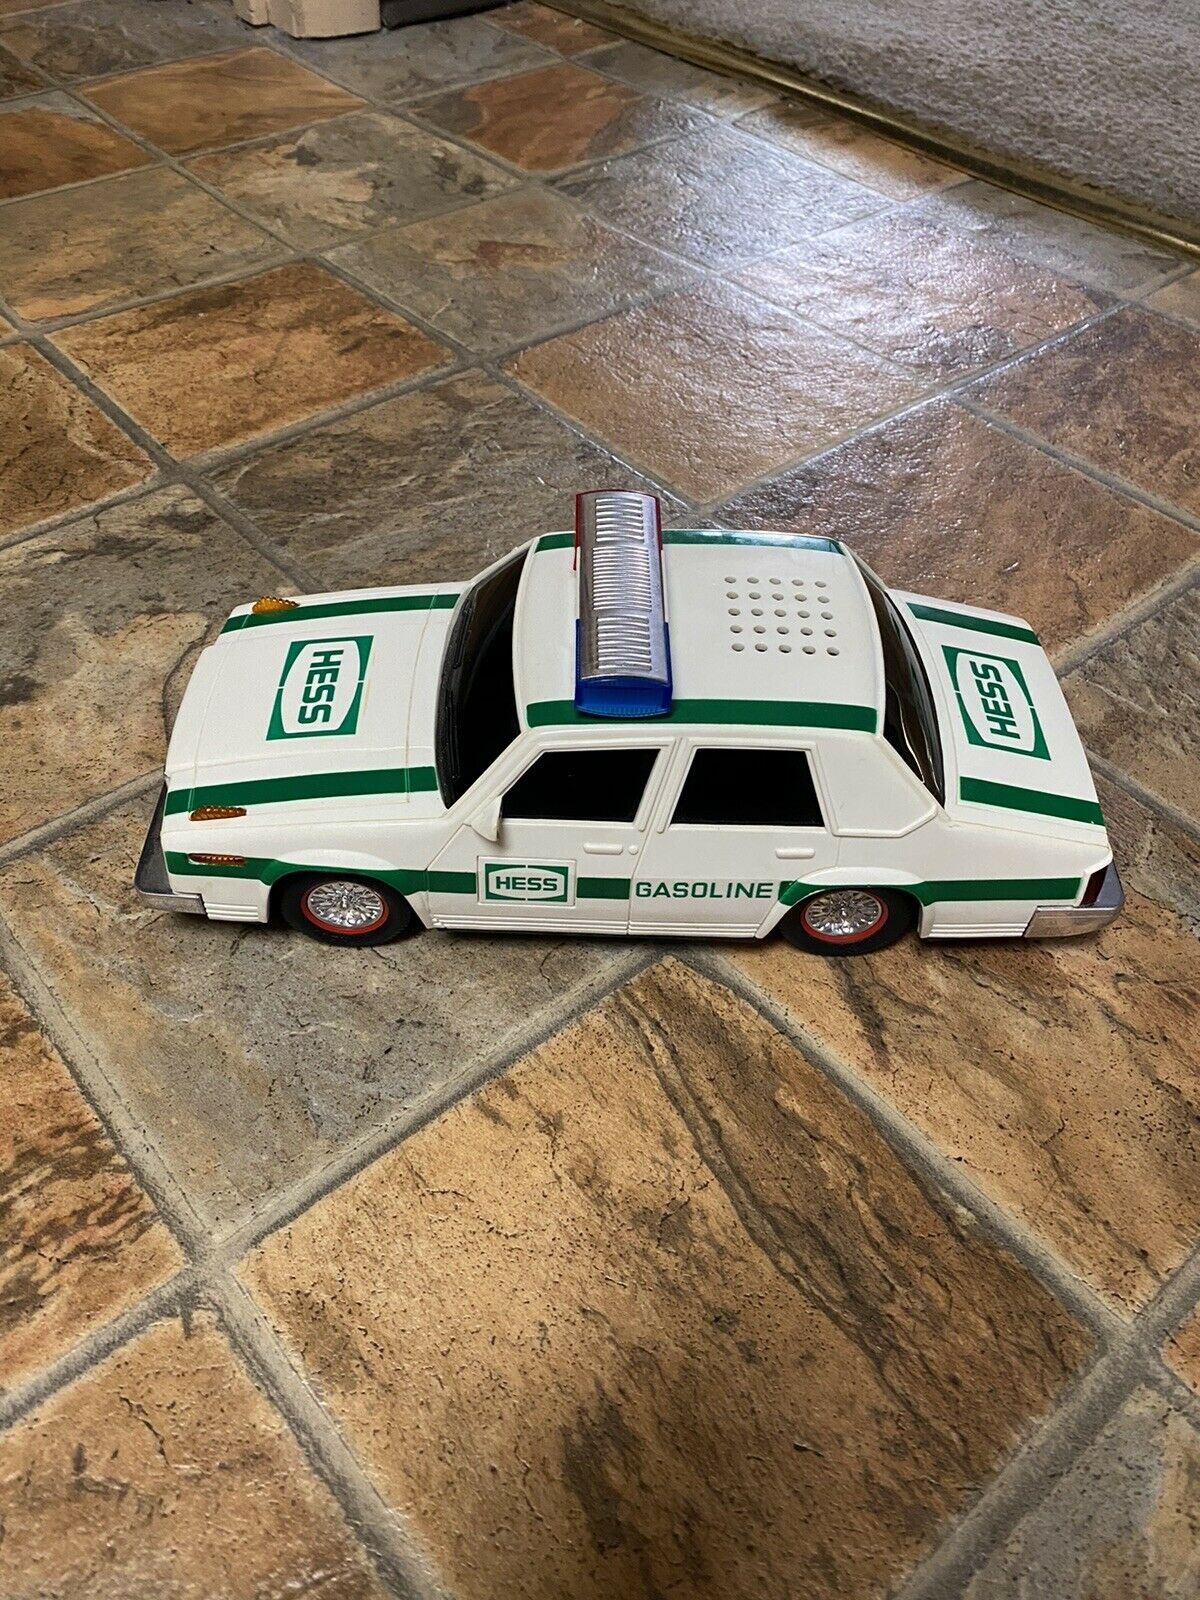 1993 Hess Truck Police Car With Original Box and Inserts